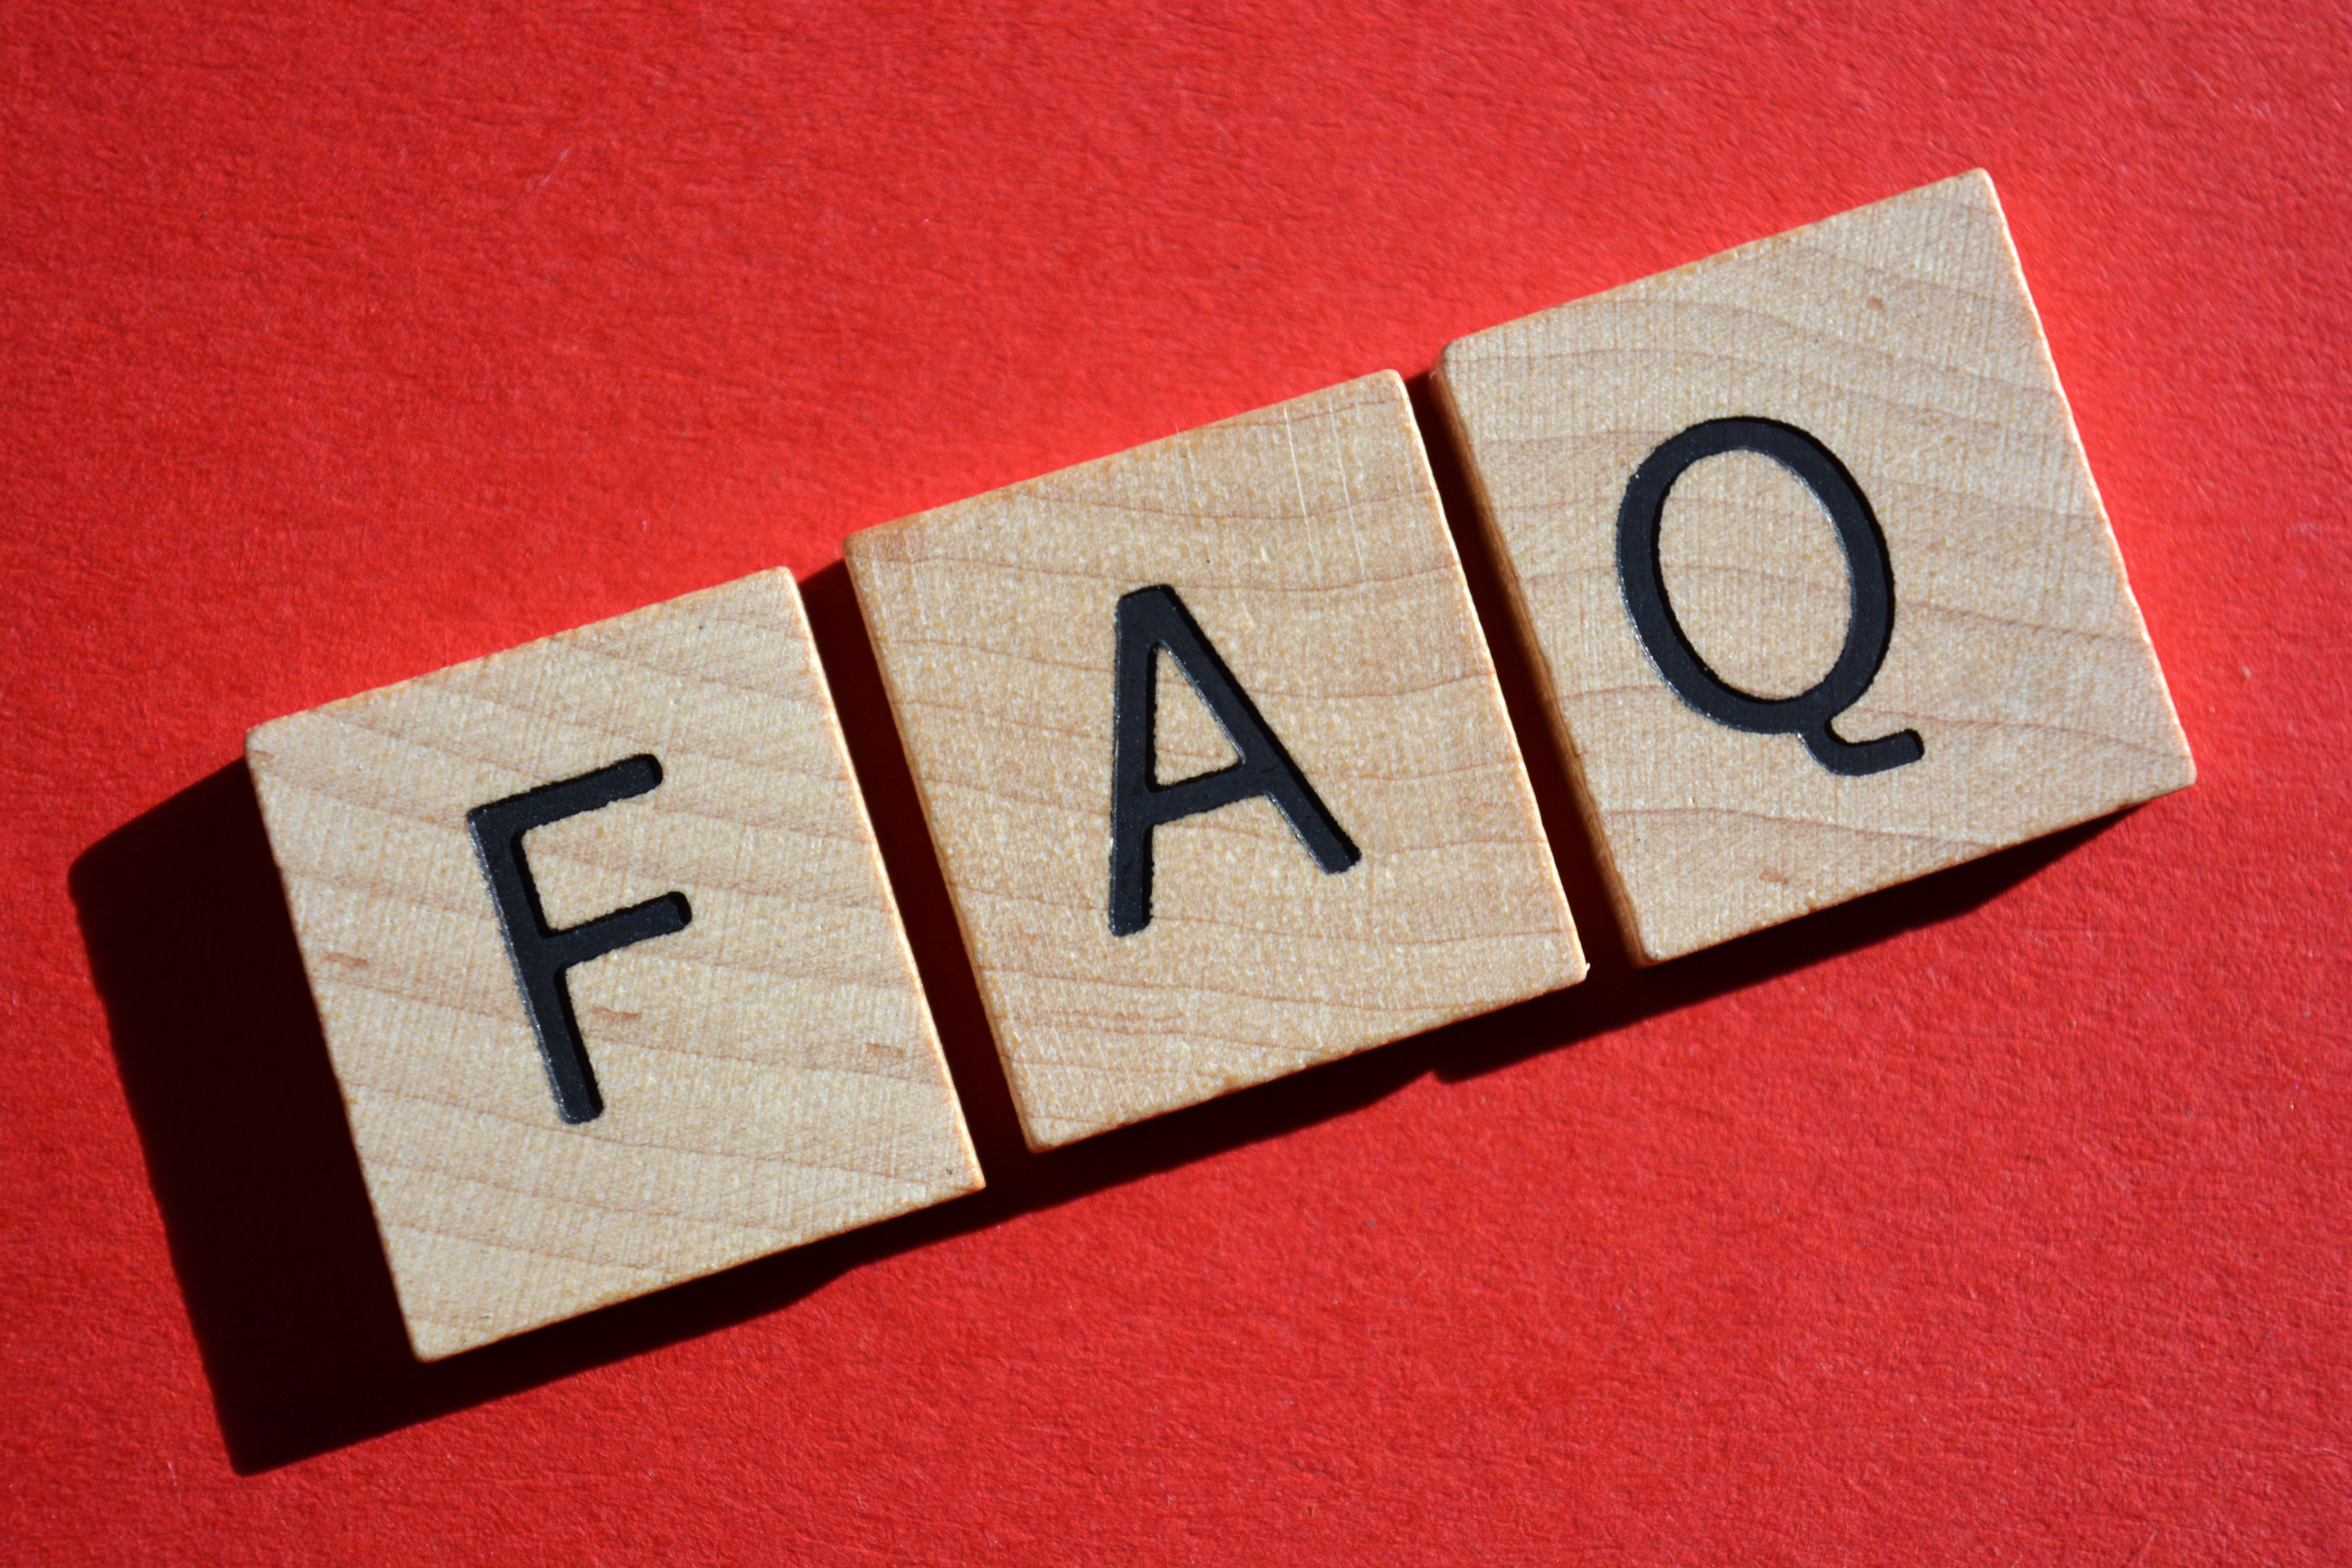 "'FAQ' spelled boldly in 3D letters against a red backdrop – your gateway to unraveling California Employment Law and HR topics through the most commonly asked questions."